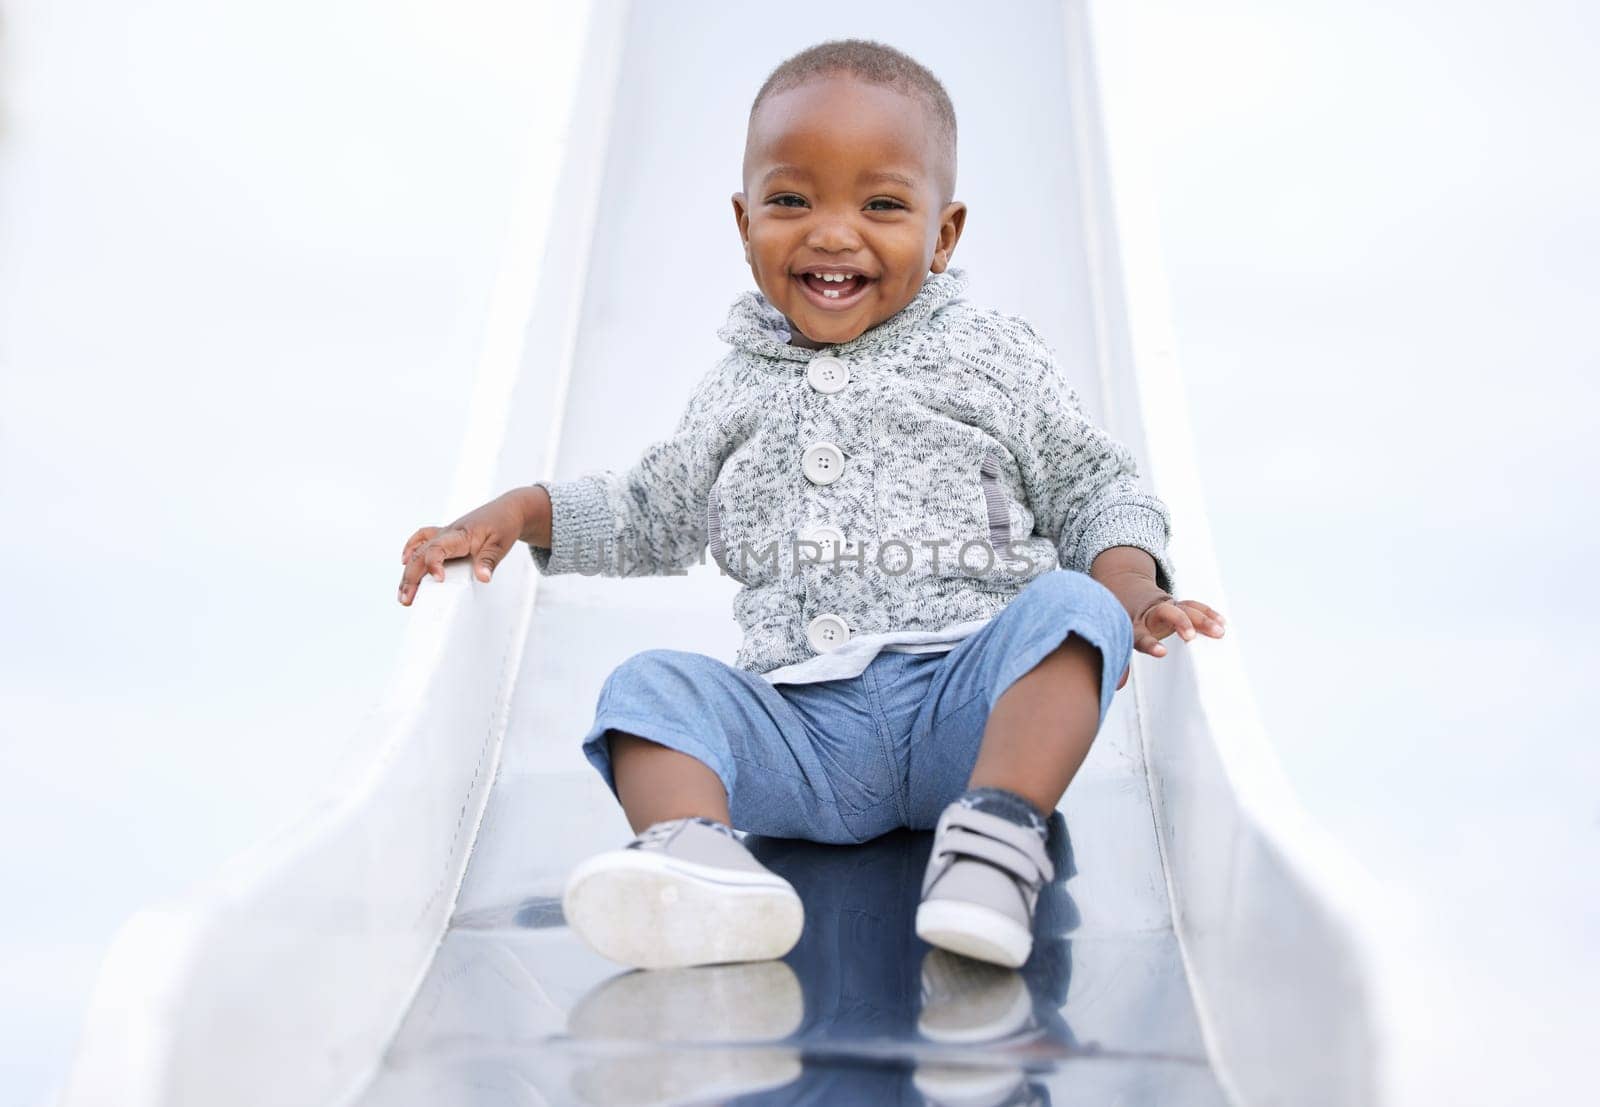 African baby, boy and slide at playground, portrait and excited for playing, learning and play in summer. Toddler, child and happy at park for games, laugh or outdoor for development at kindergarten by YuriArcurs